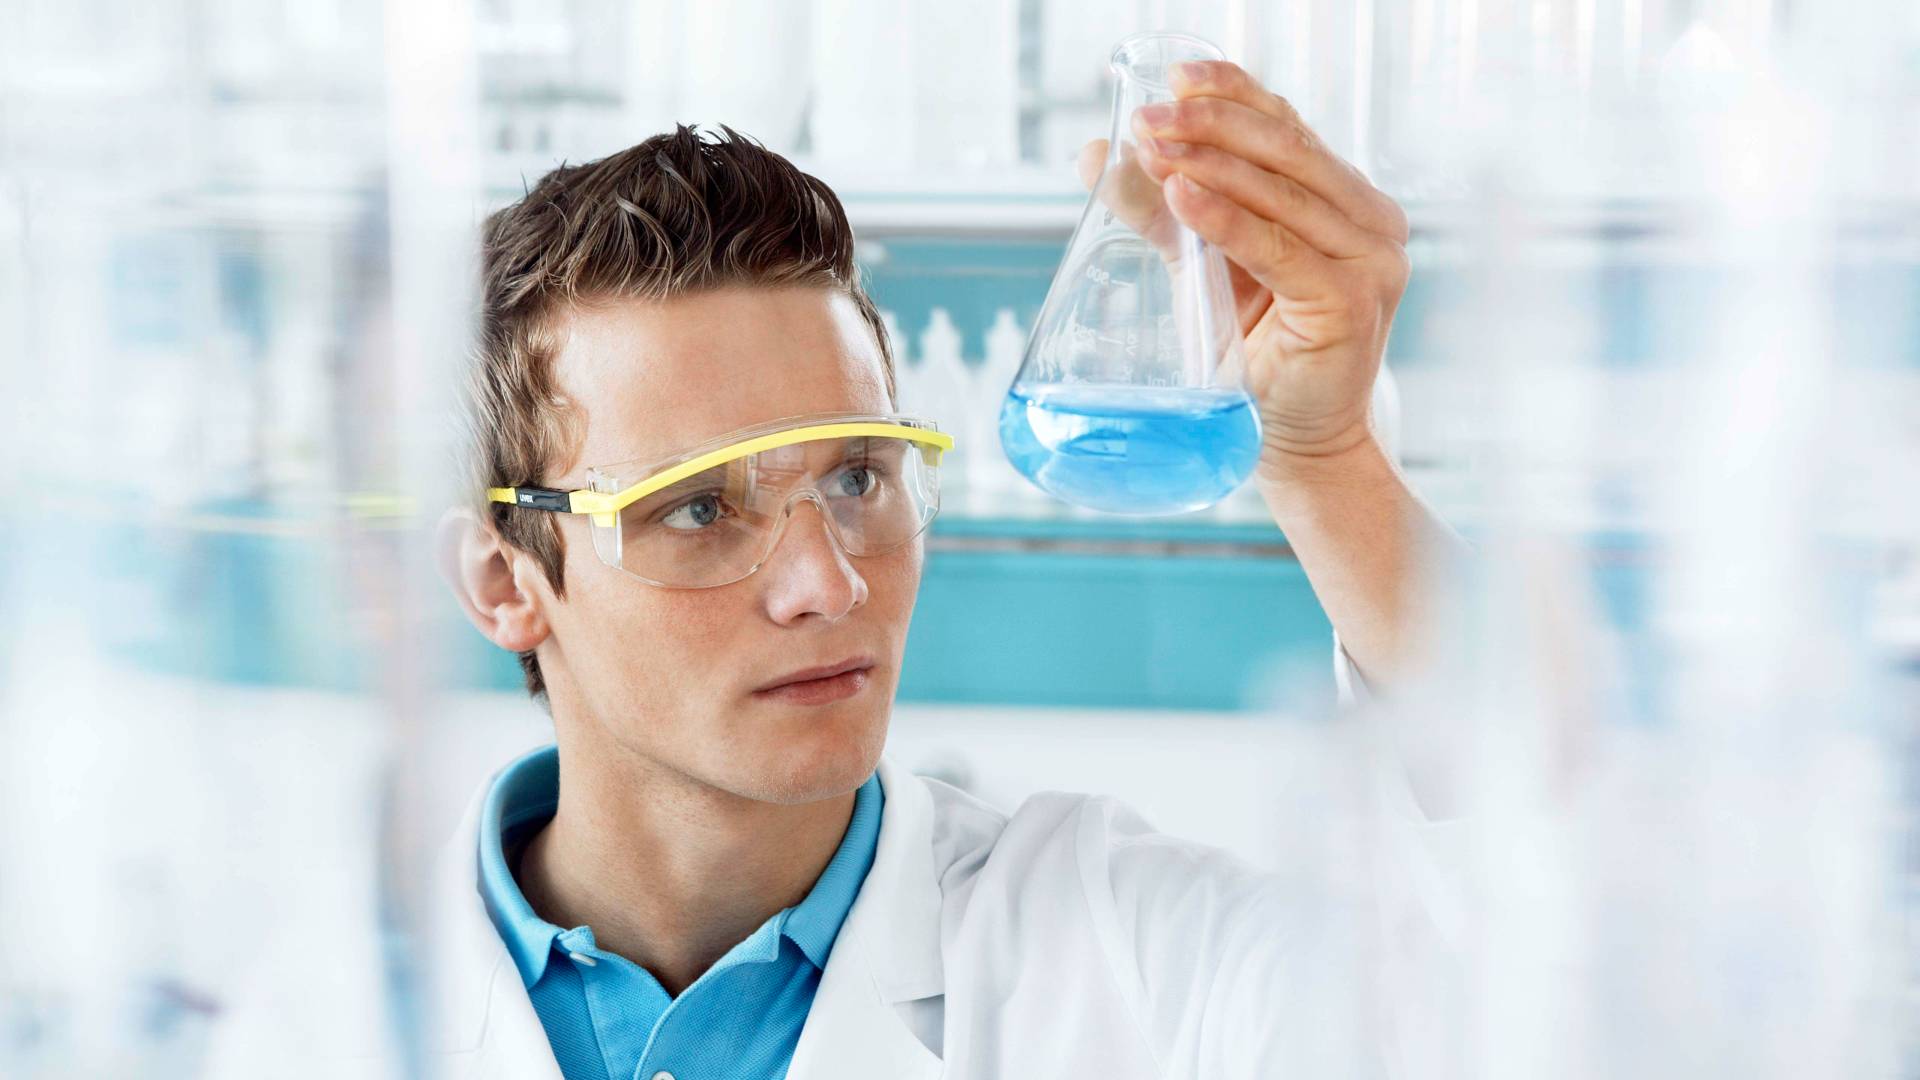 Lab technician holding conical flask